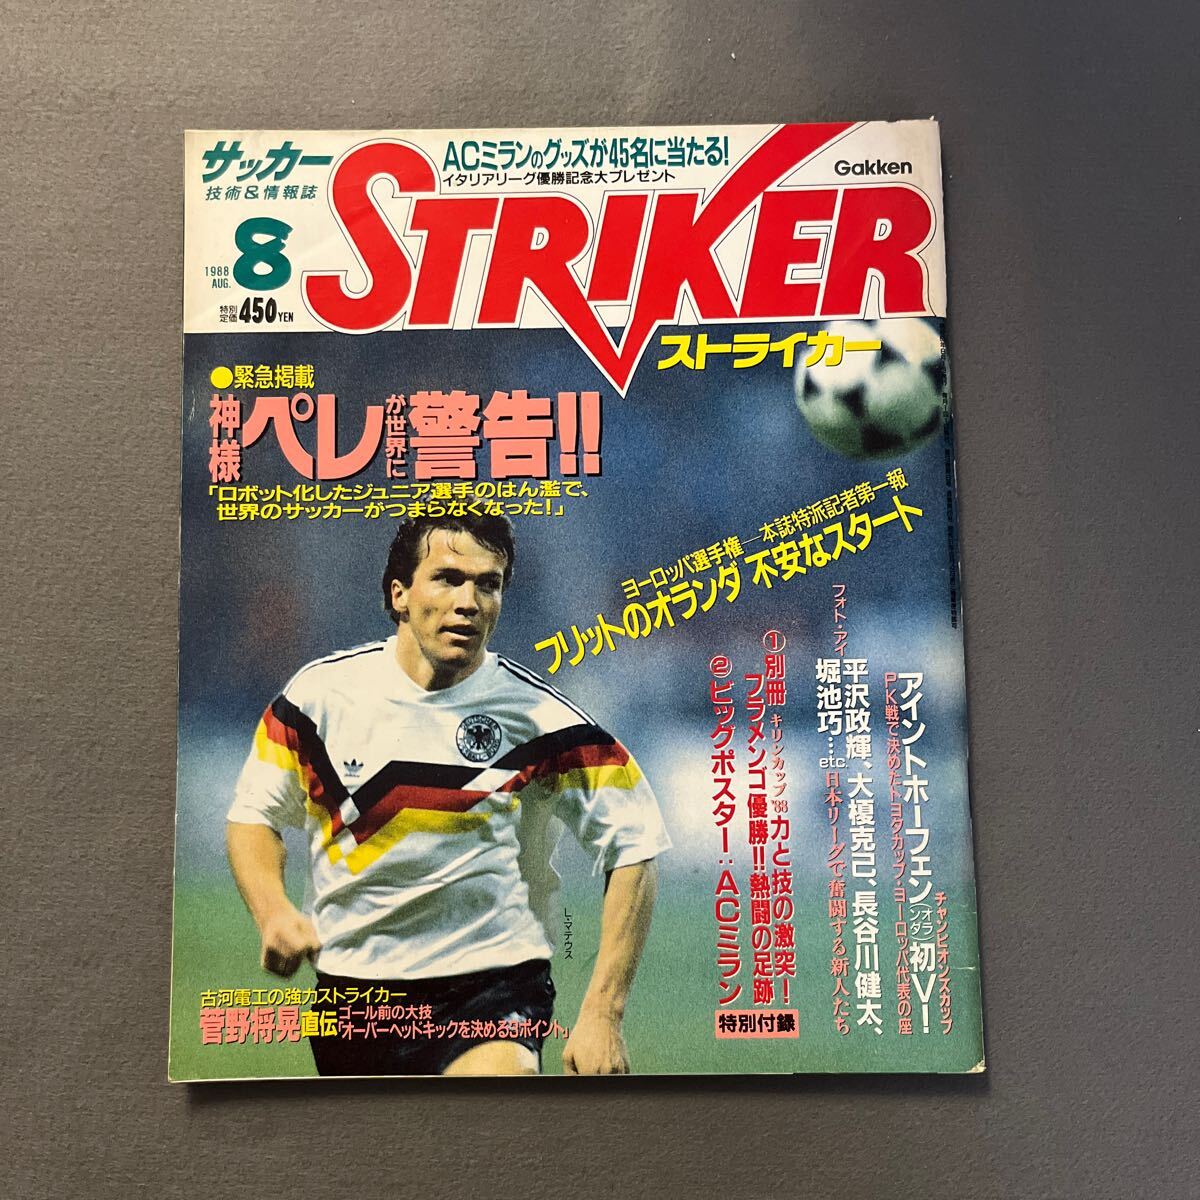  striker circle Showa era 63 year 8 month 1 day issue * soccer *mate light * Pele *flito* Holland * Europe player right *a in to* horn fender 